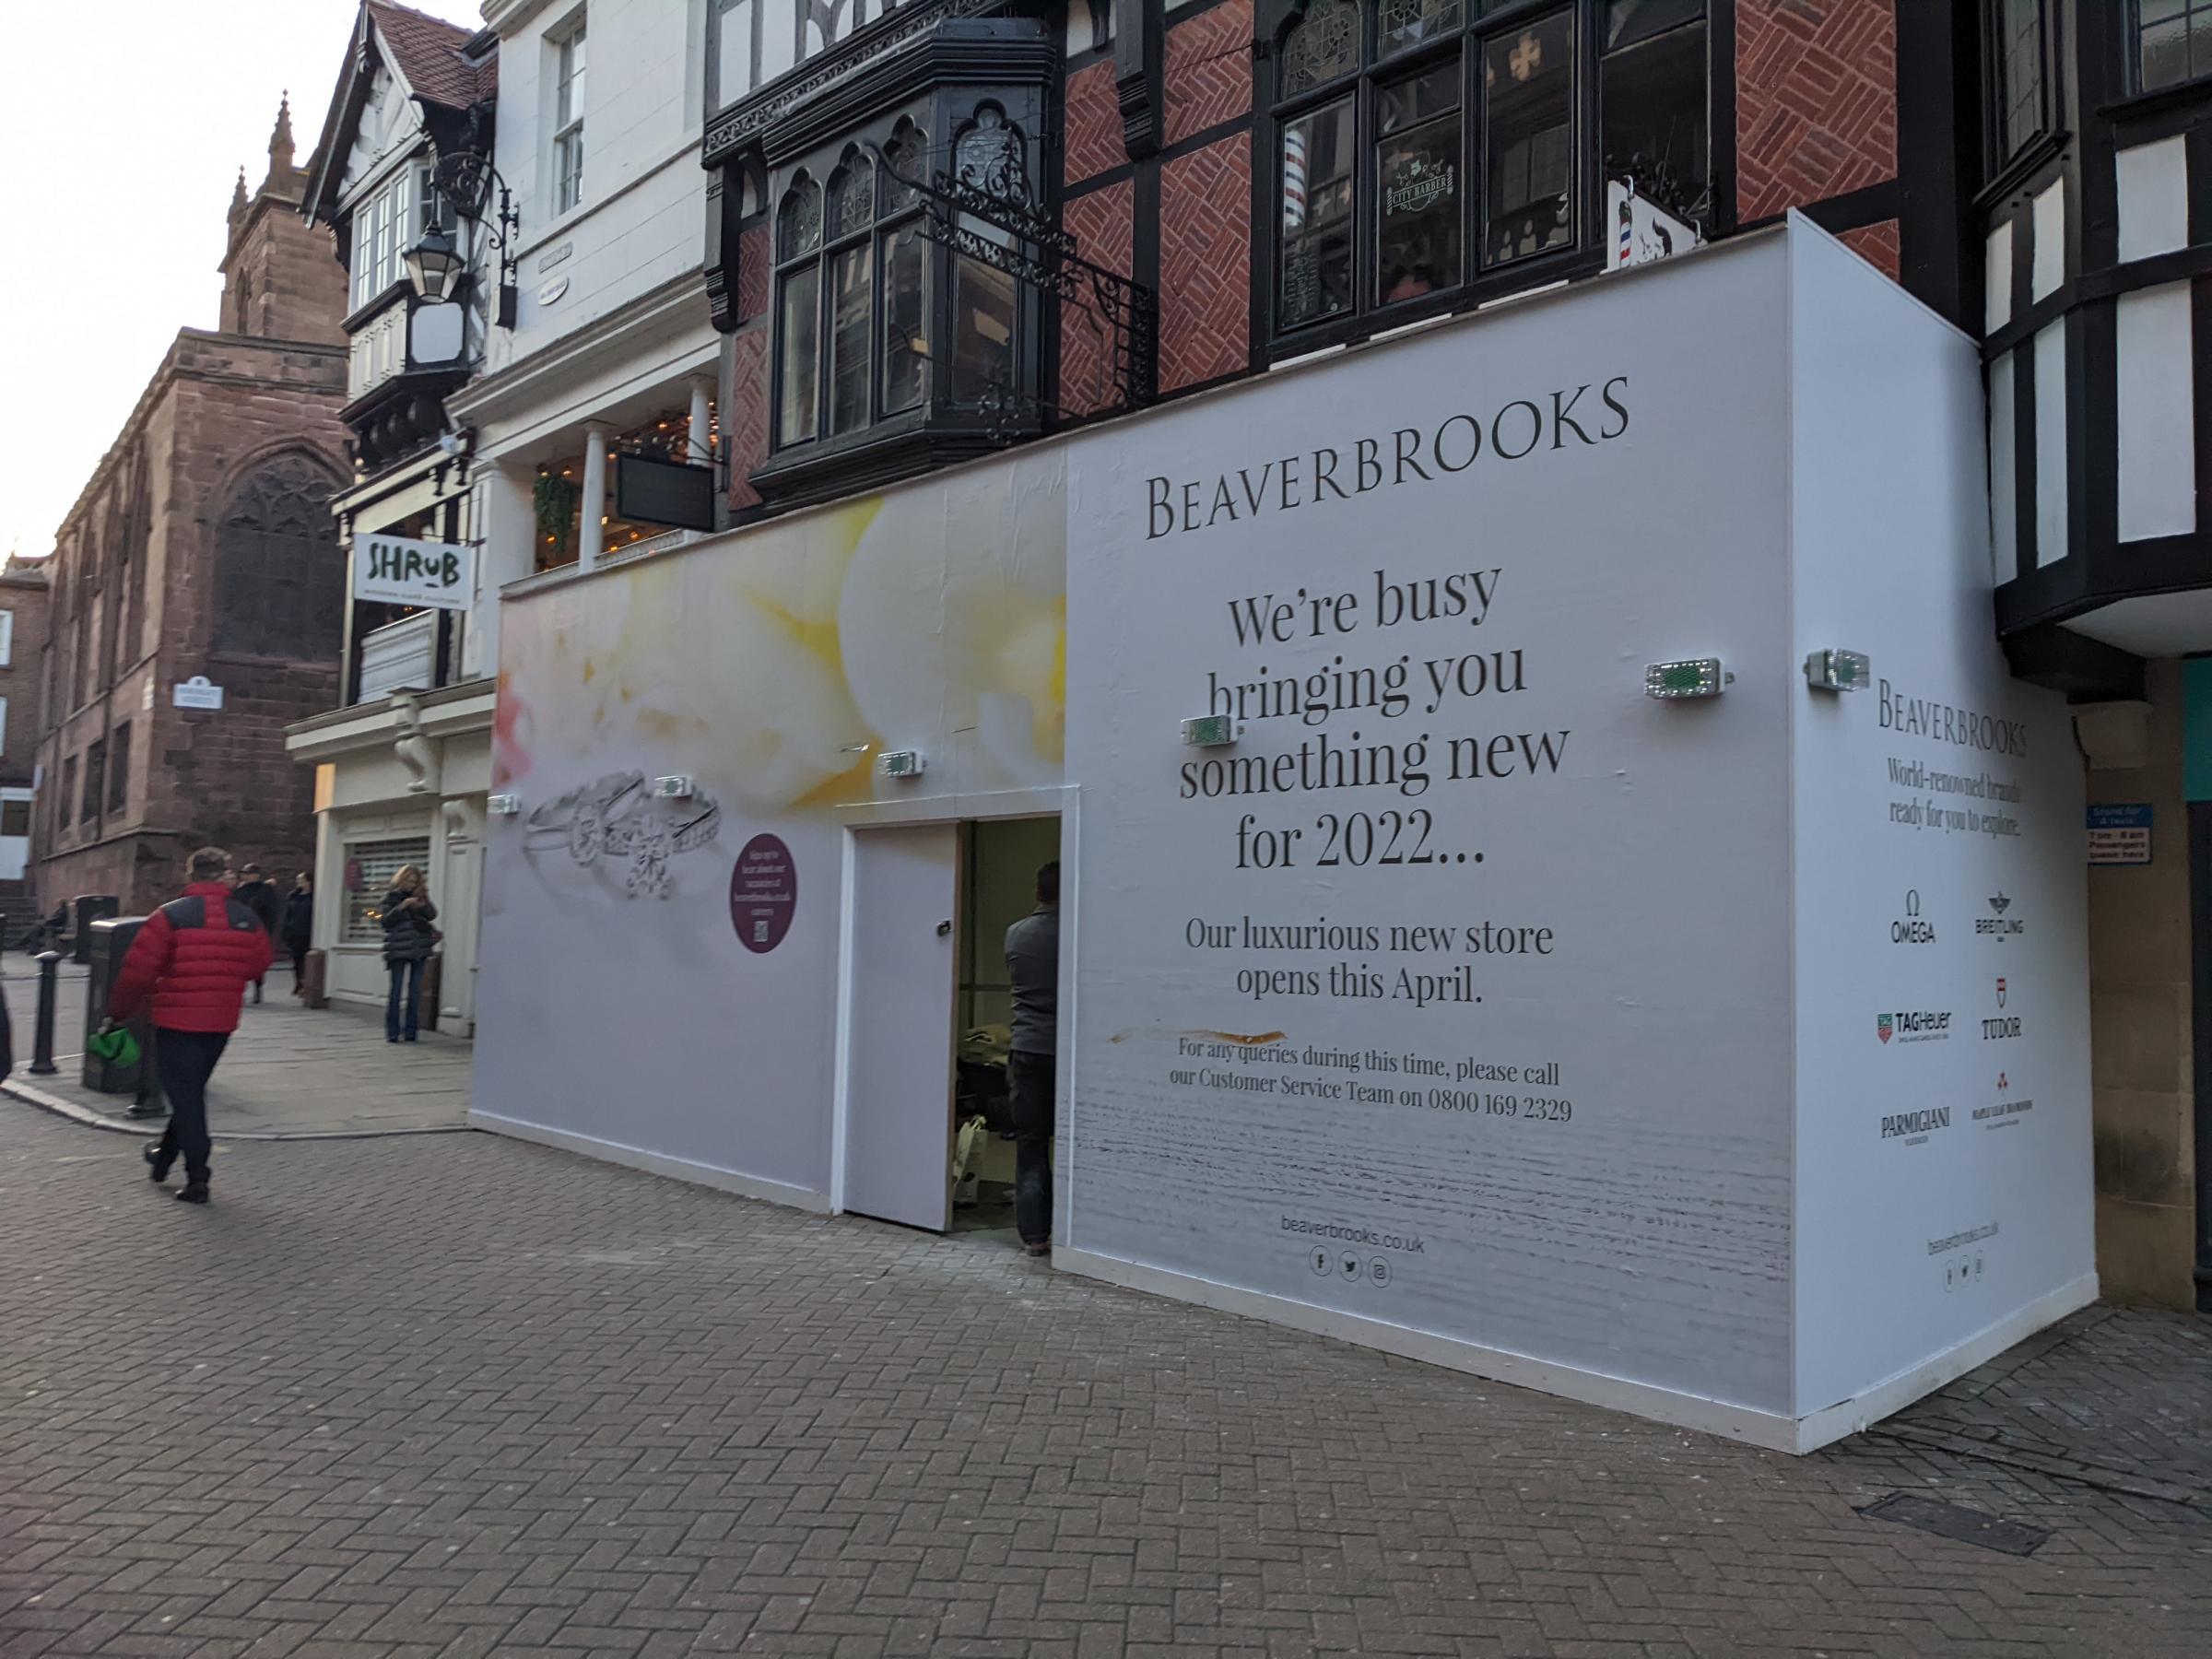 Beaverbrooks had been undergoing a significant revamp.